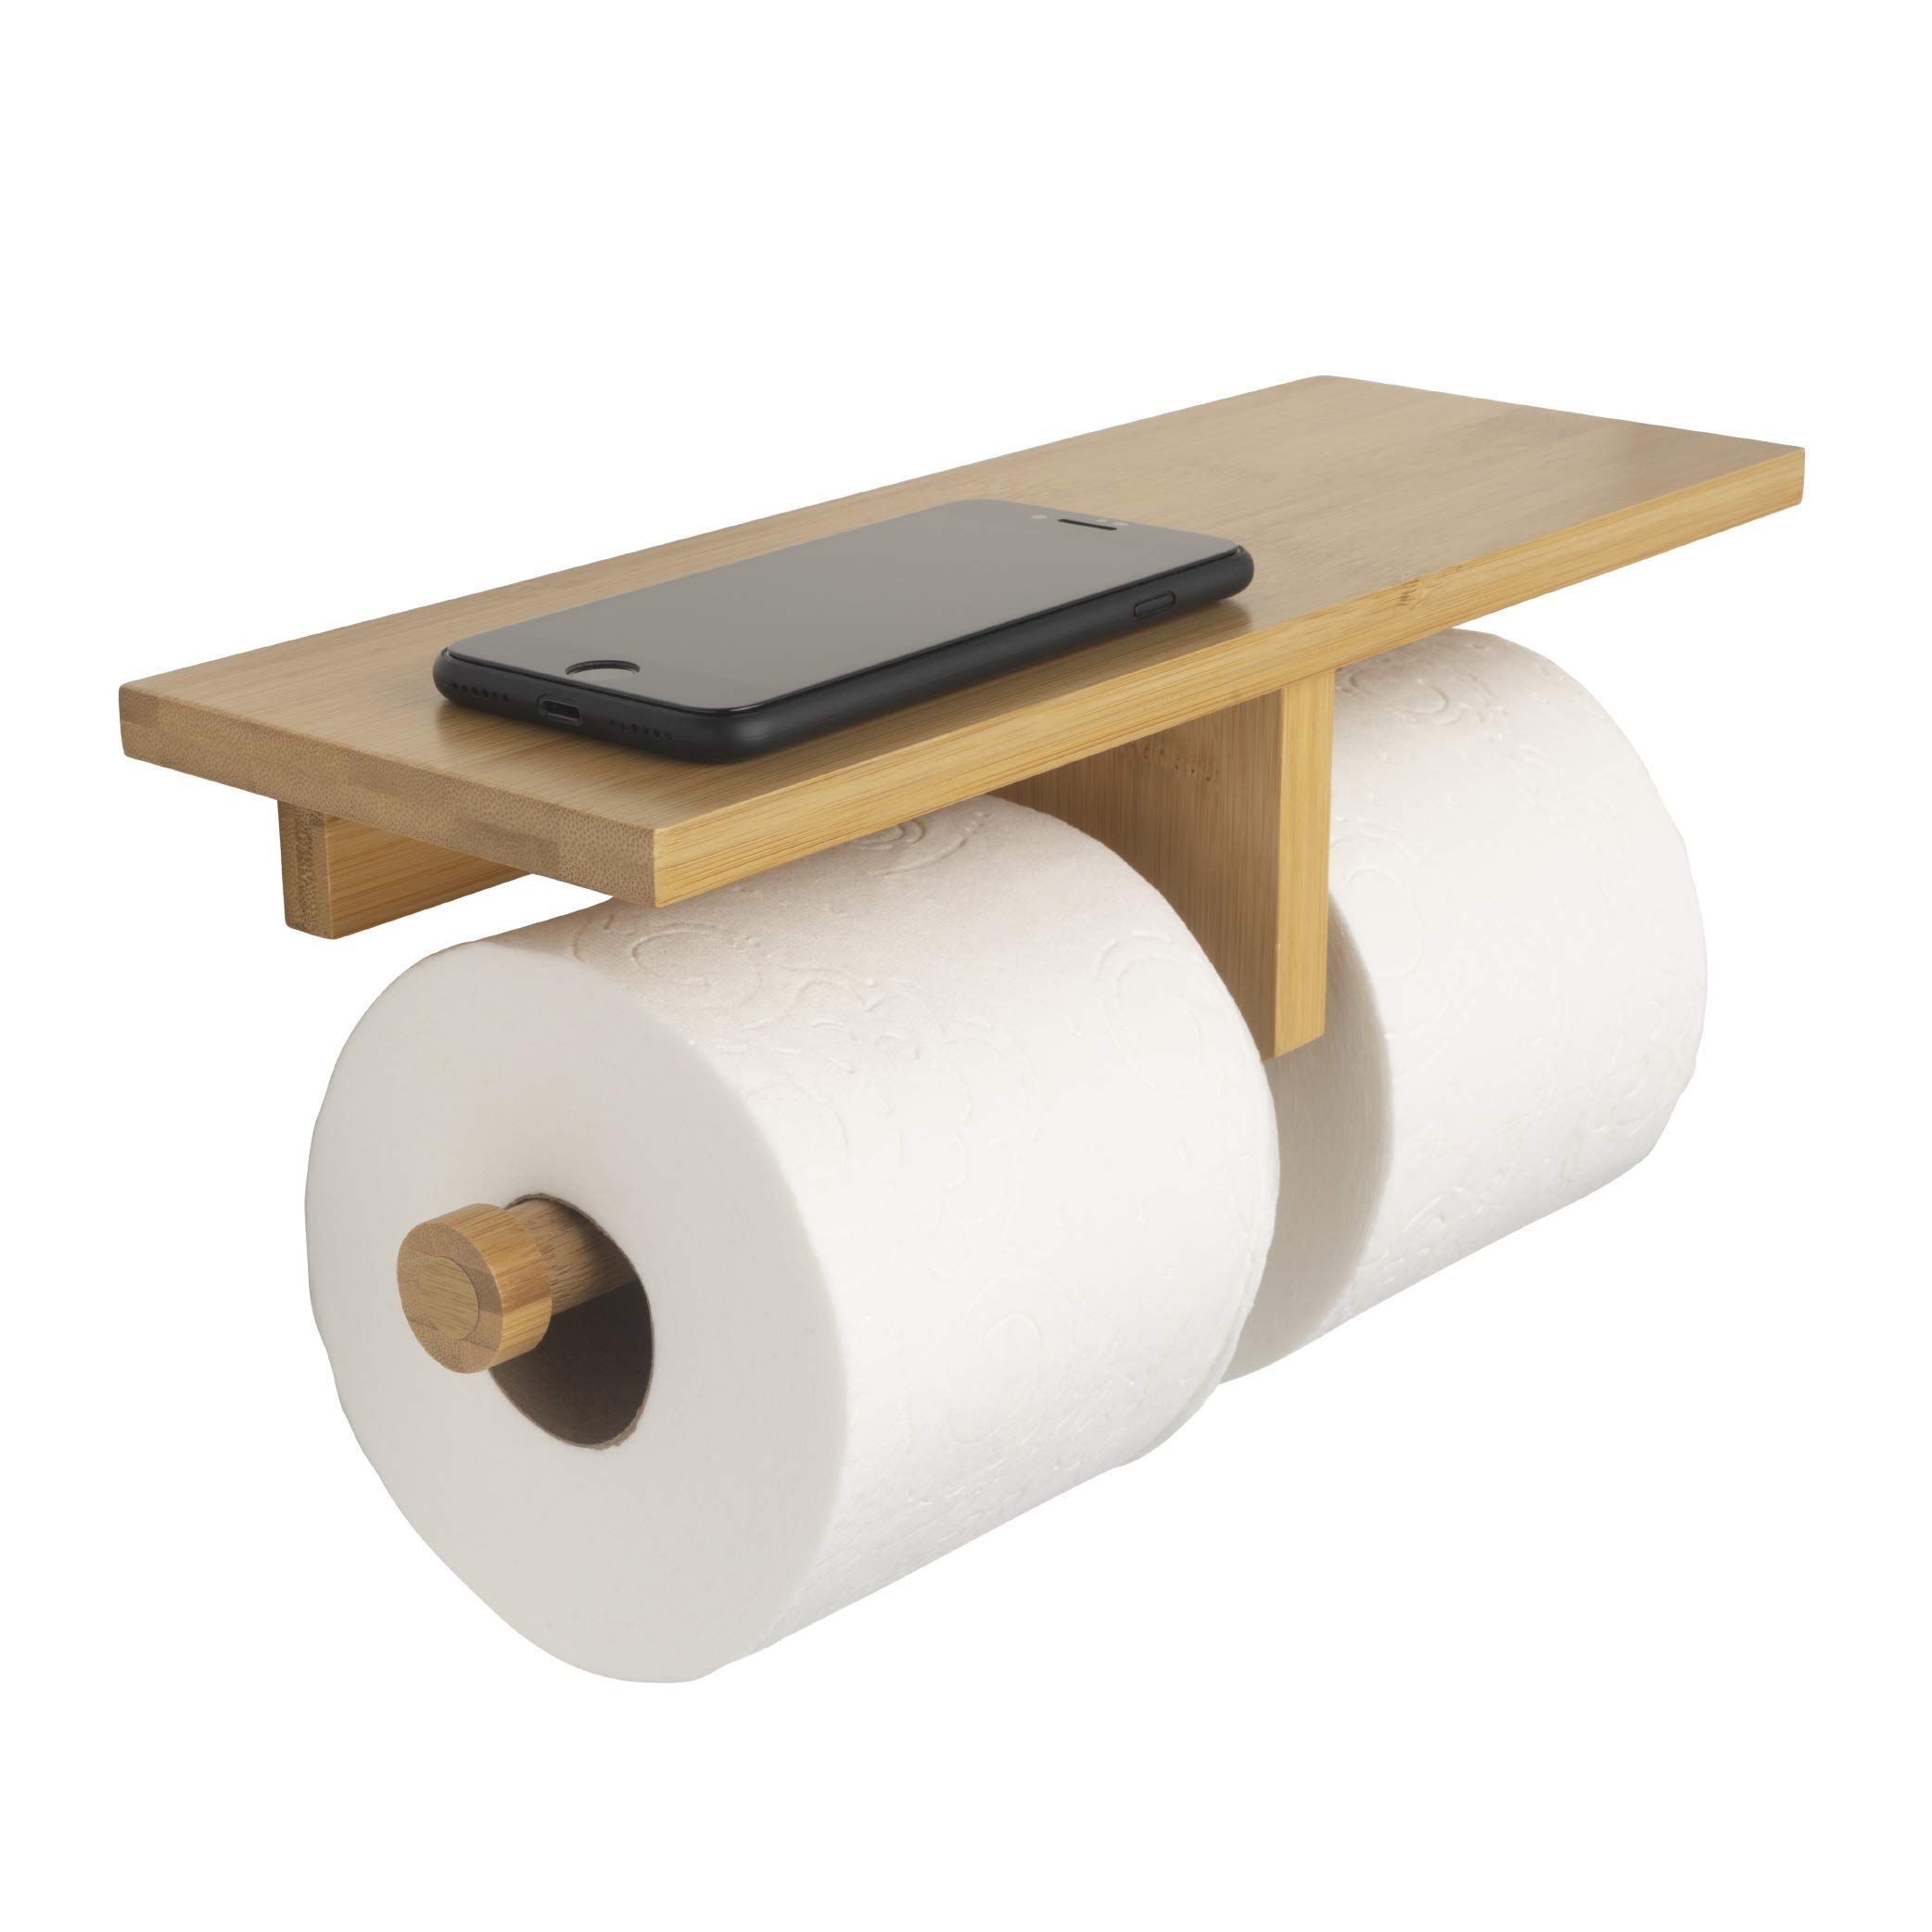  Fixwal Paper Towel Holder Under Cabinet, Single Hand